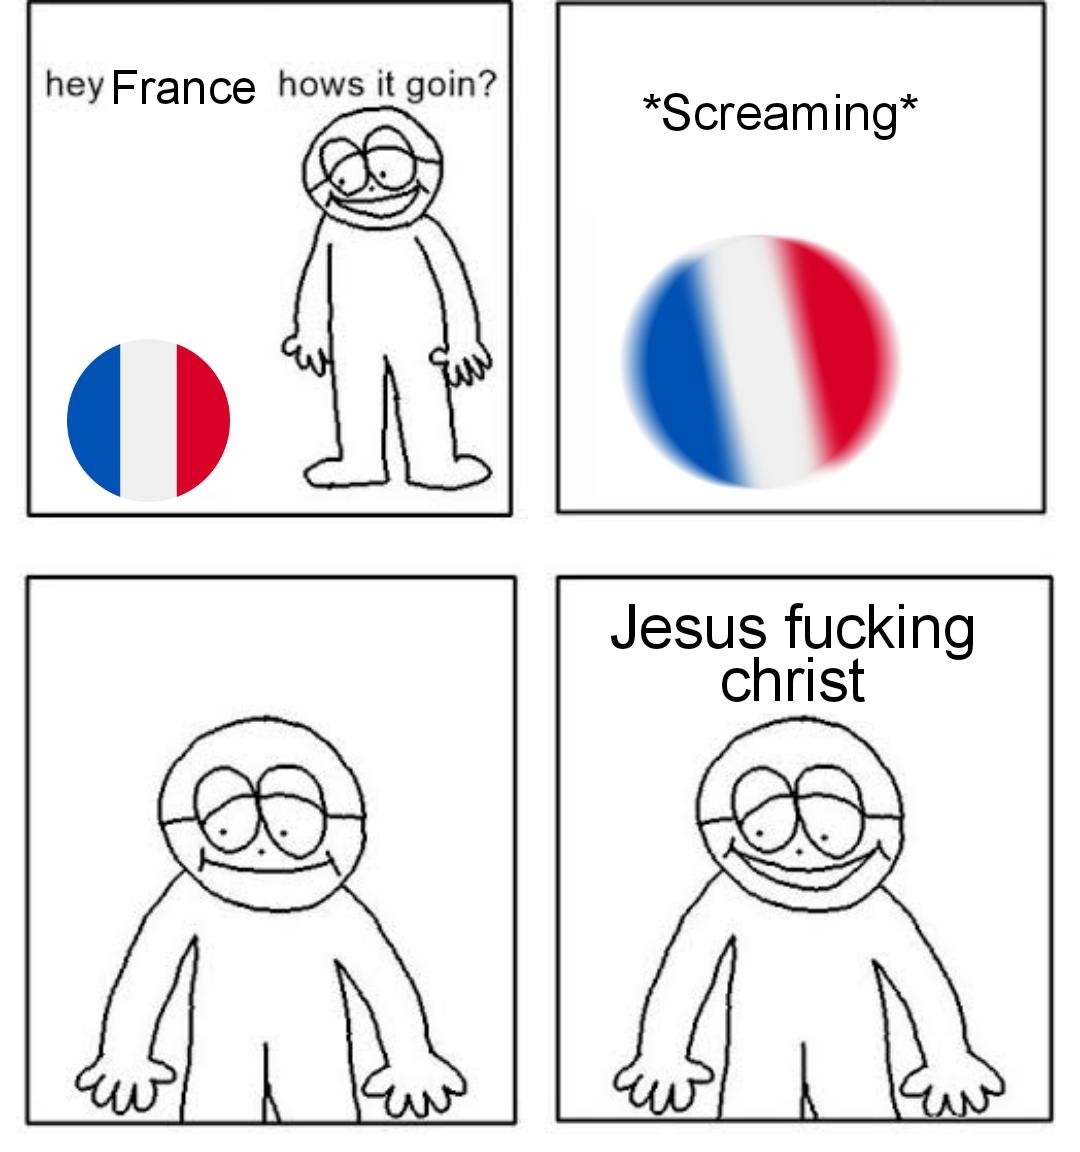 The French riot - meme